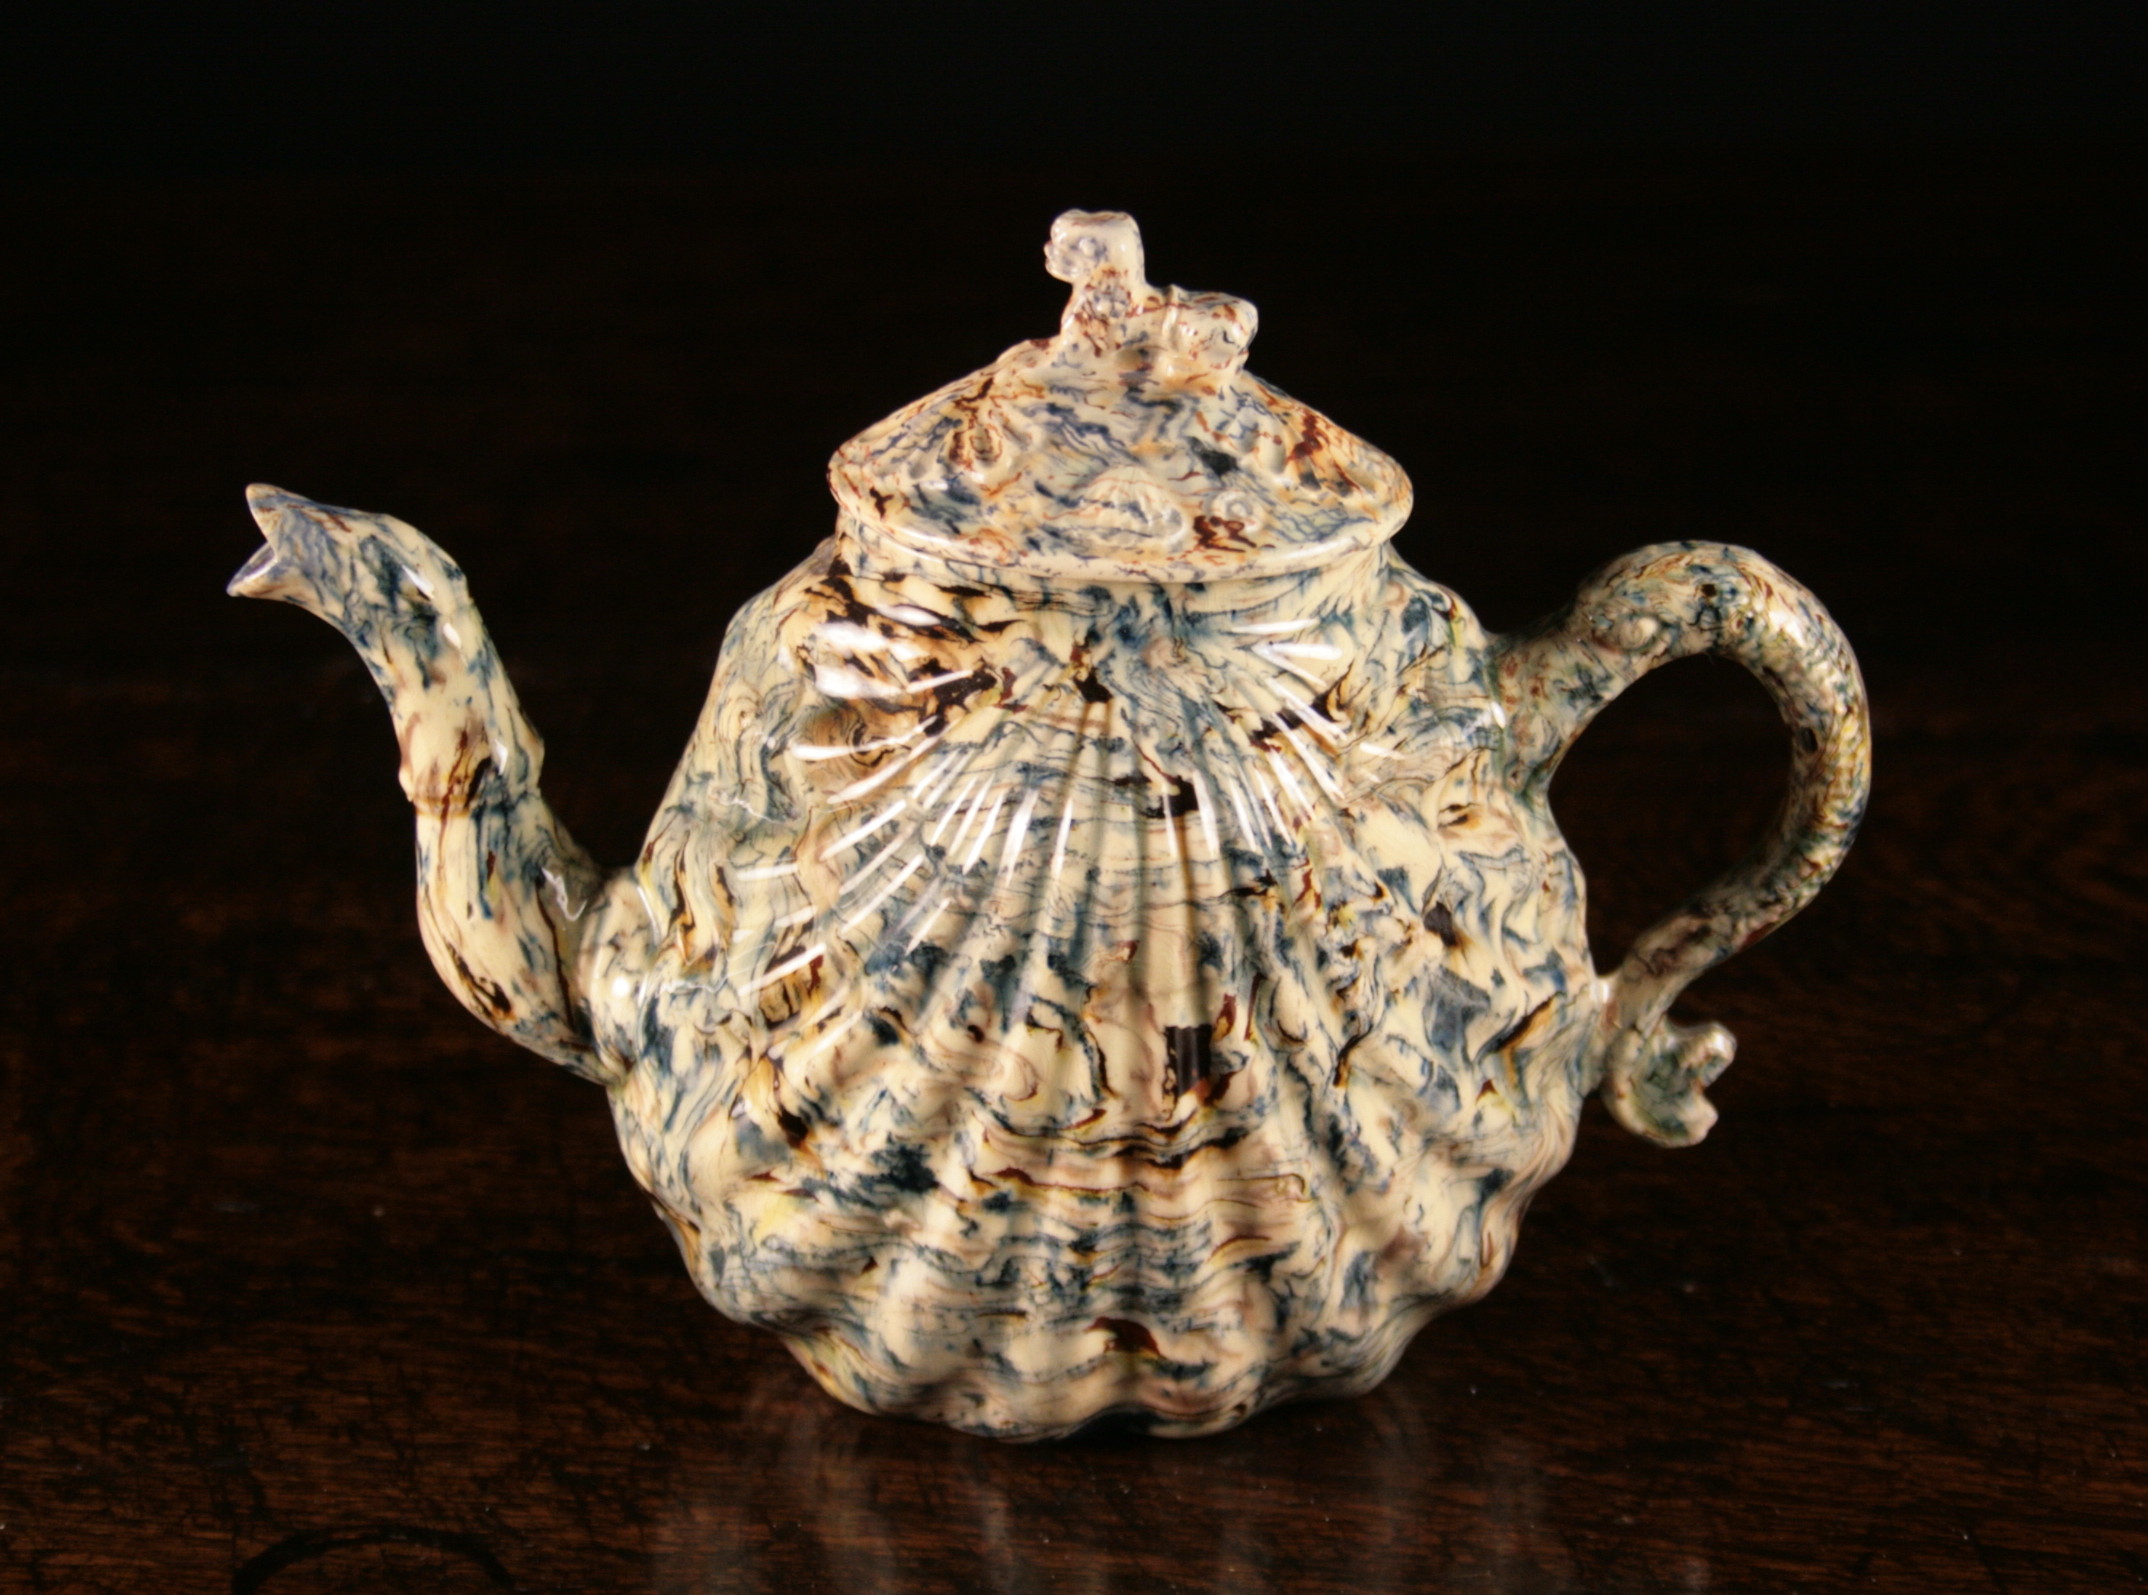 A Staffordshire Agateware Moulded Pecten-Shell Teapot, Circa 1750-60, 5½ ins (14 cms) in height.